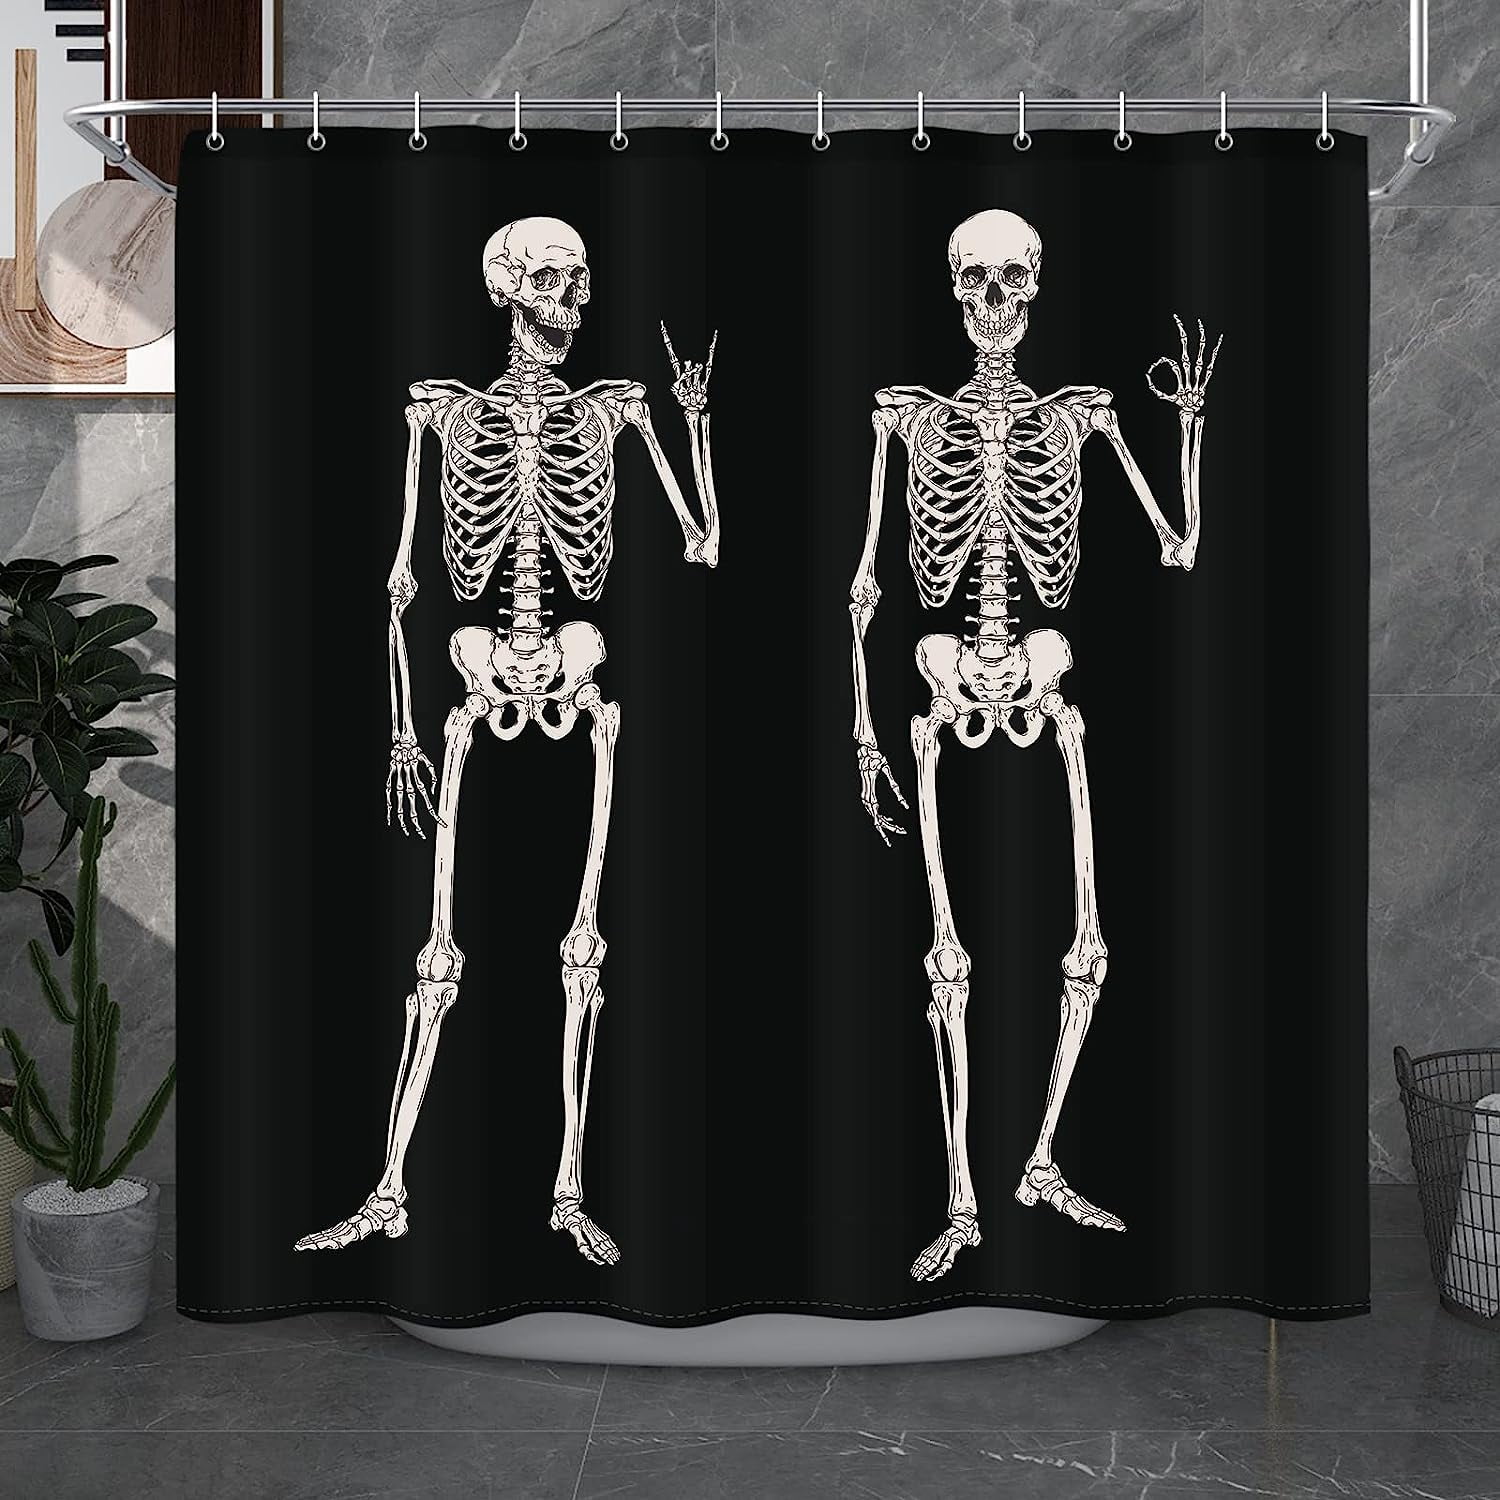 JOOCAR Cool Halloween Skull Shower Curtain, Funny Gothic Skeleton Day of  Death Goth Bathroom Decor, Waterproof Fabric Polyester Curtain Set, with 12 